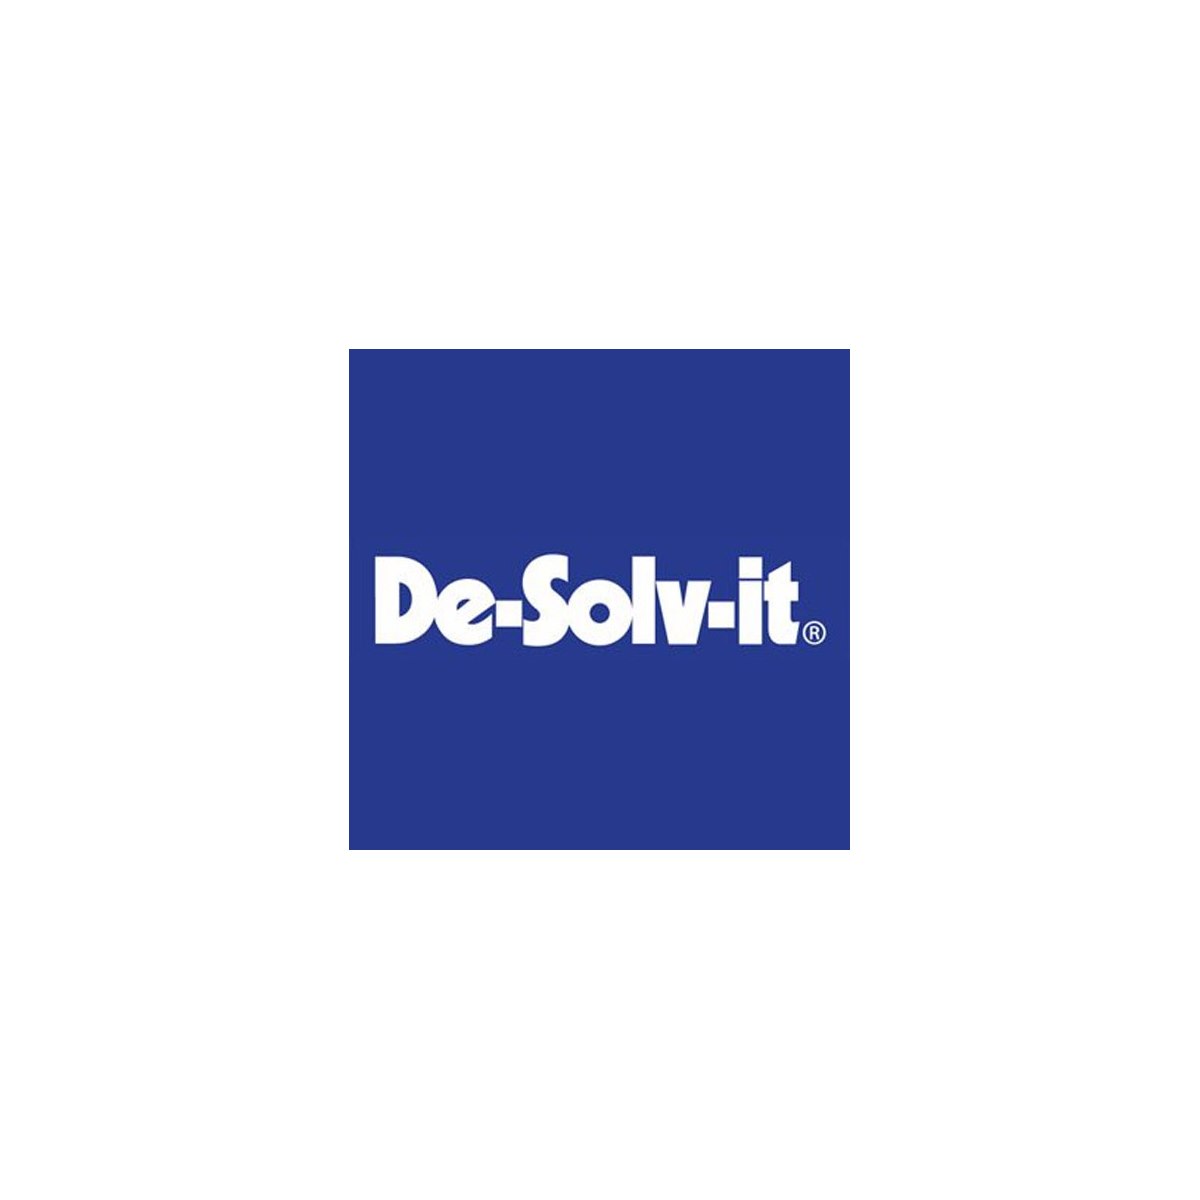 Where to Buy De-Solv-It Products